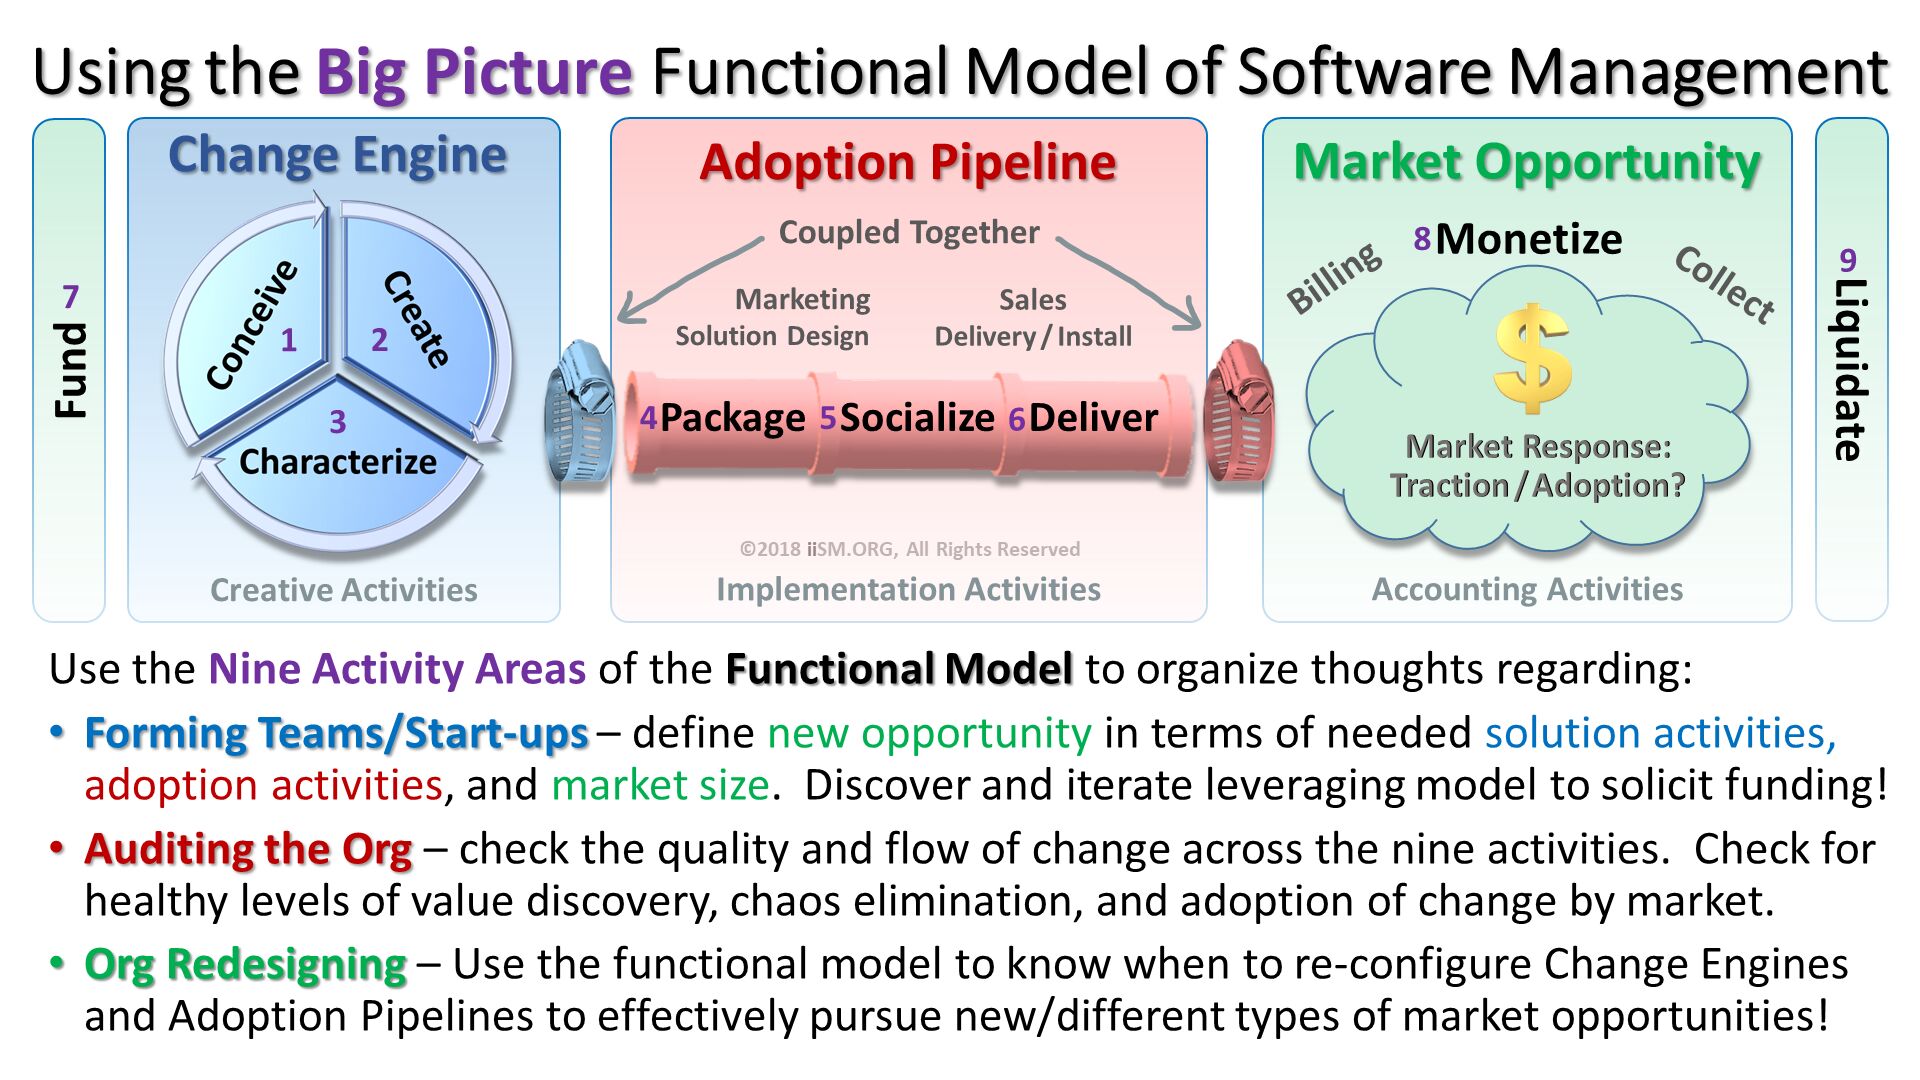 Use the Nine Activity Areas of the Functional Model to organize thoughts regarding:
Forming Teams/Start-ups – define new opportunity in terms of needed solution activities, adoption activities, and market size.  Discover and iterate leveraging model to solicit funding!
Auditing the Org – check the quality and flow of change across the nine activities.  Check for healthy levels of value discovery, chaos elimination, and adoption of change by market.
Org Redesigning – Use the functional model to know when to re-configure Change Engines and Adoption Pipelines to effectively pursue new/different types of market opportunities! . ©2018 iiSM.ORG, All Rights Reserved. 1. 2. 3. 4. 5. 6. 7. 8. 9. Using the Big Picture Functional Model of Software Management. 